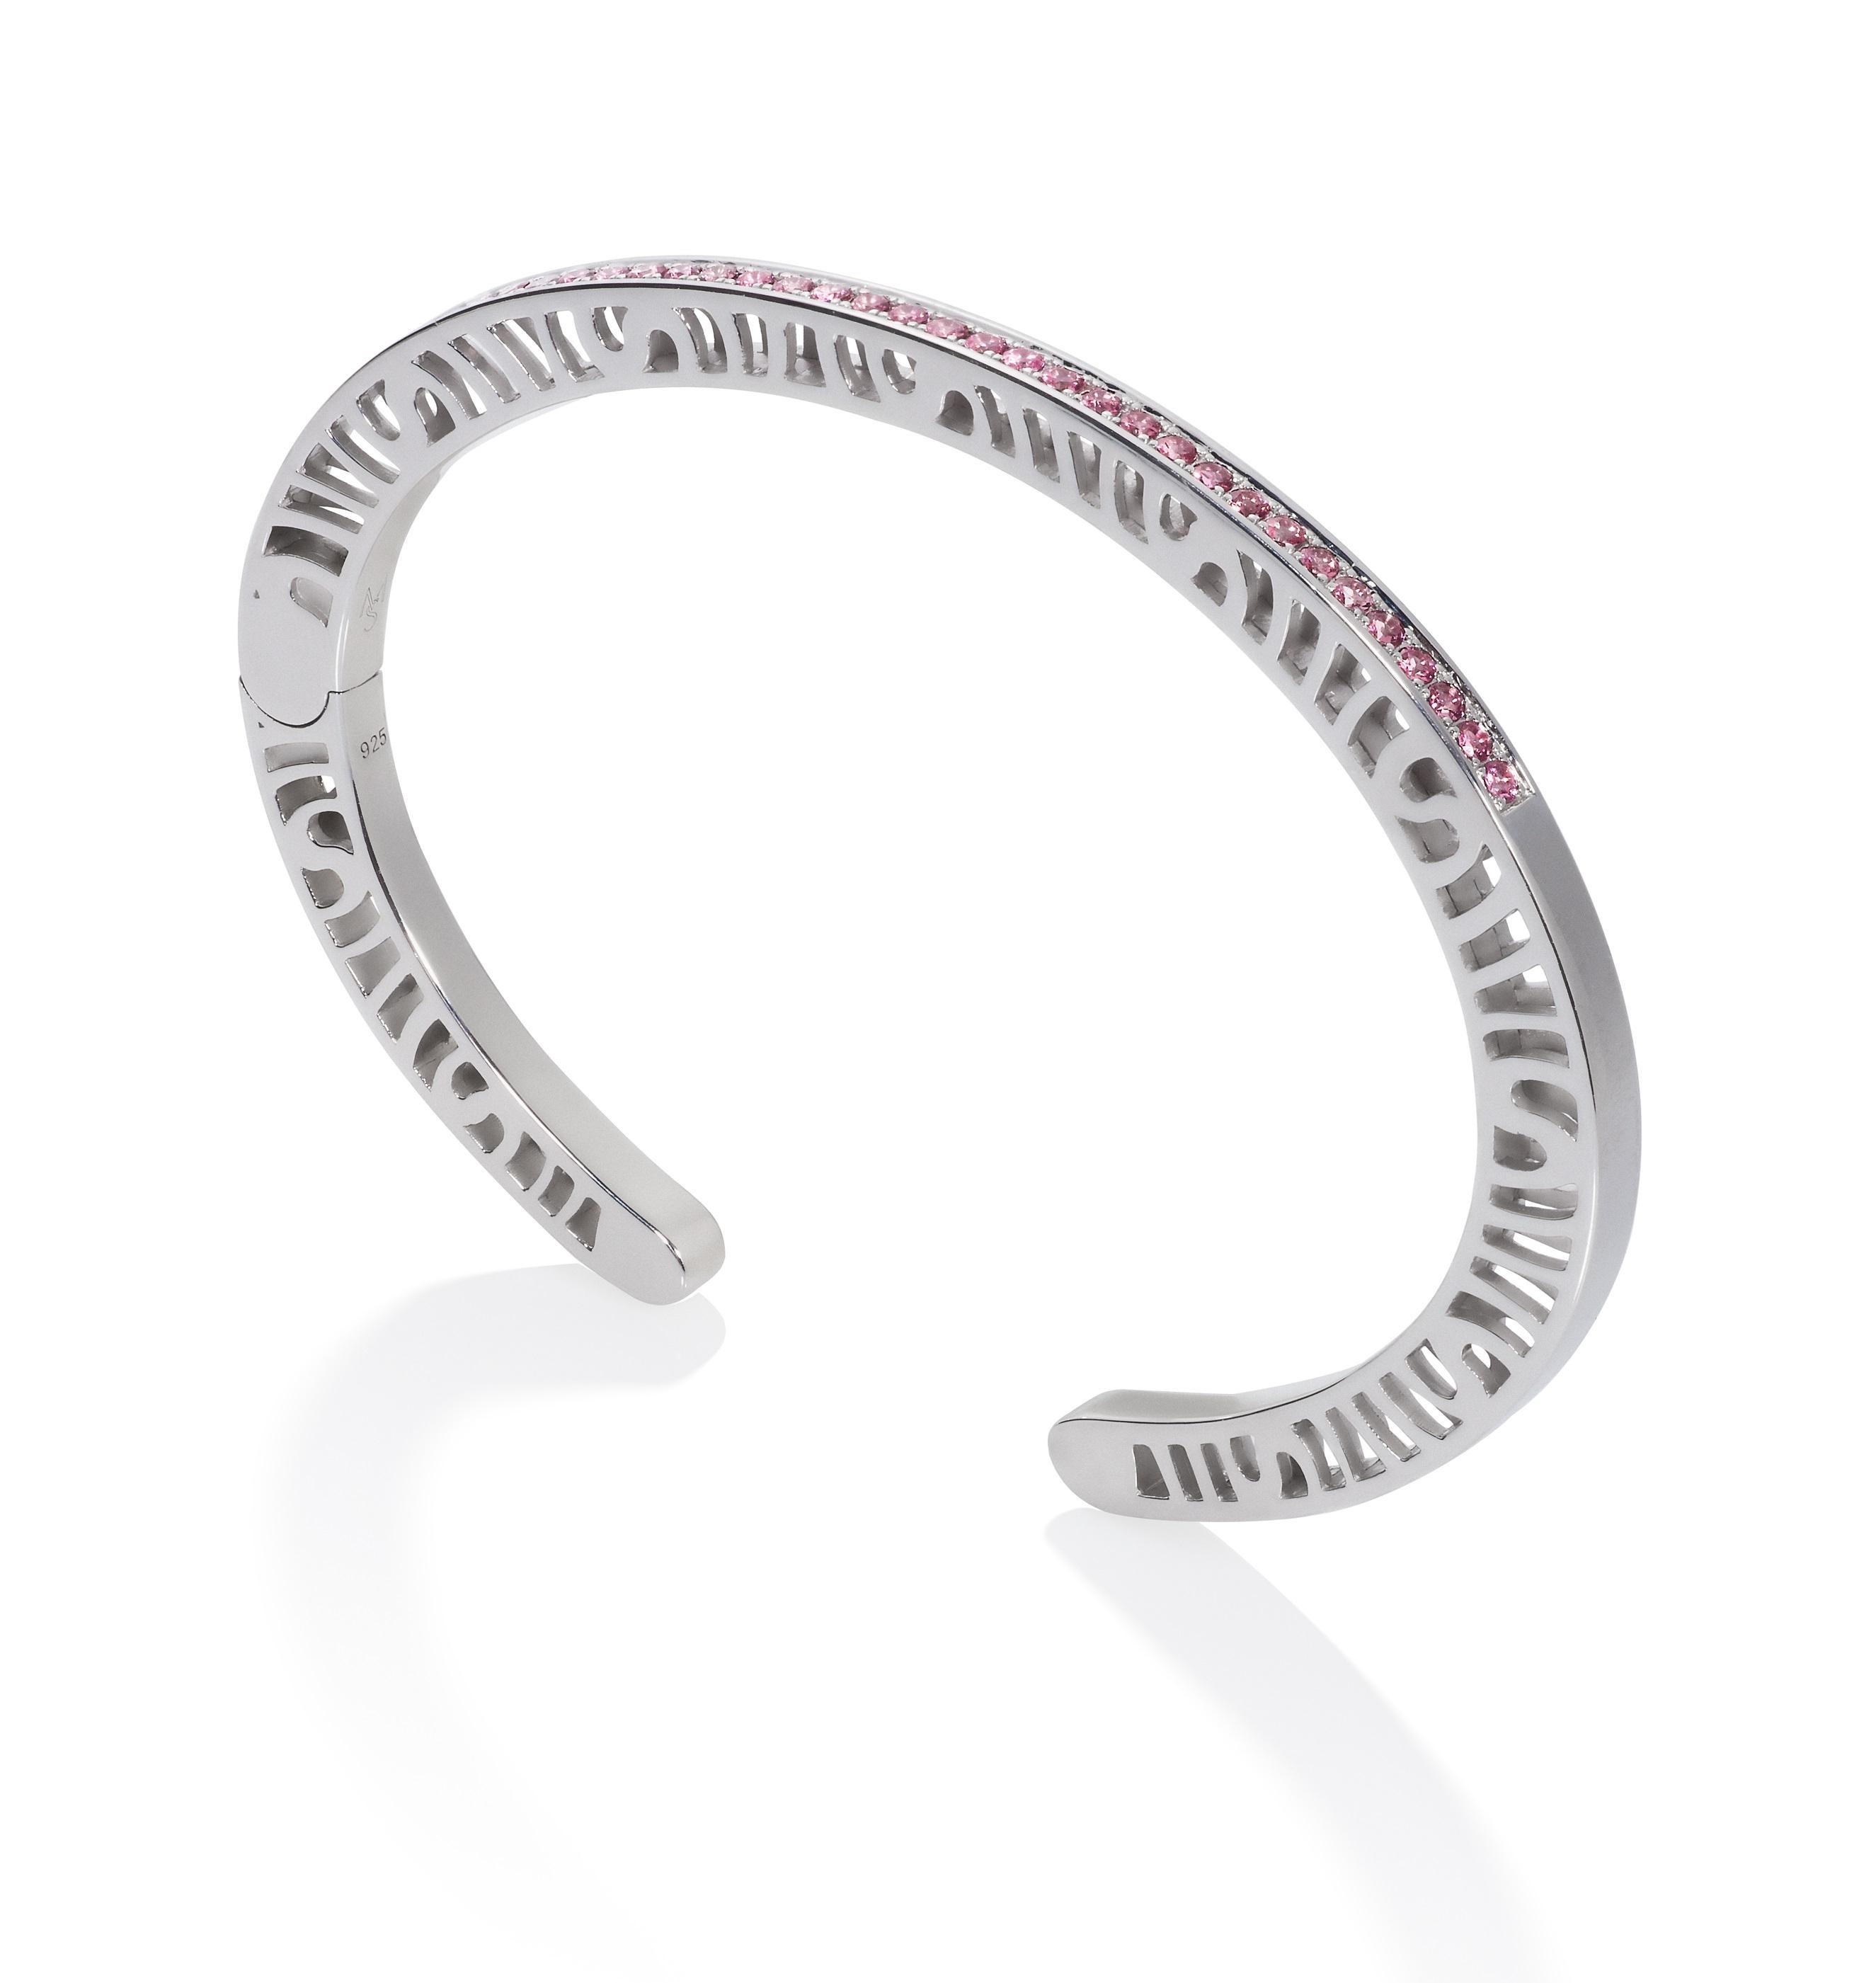 The contemporary 3mm cuff from the Shooting Stars Collection is made with 33 mixed color gemstones on the top (1.55 mm each).  Total carat weight is 0.69 cts. The sides have a high polish to an almost mirror finish and are pierced with the Shooting